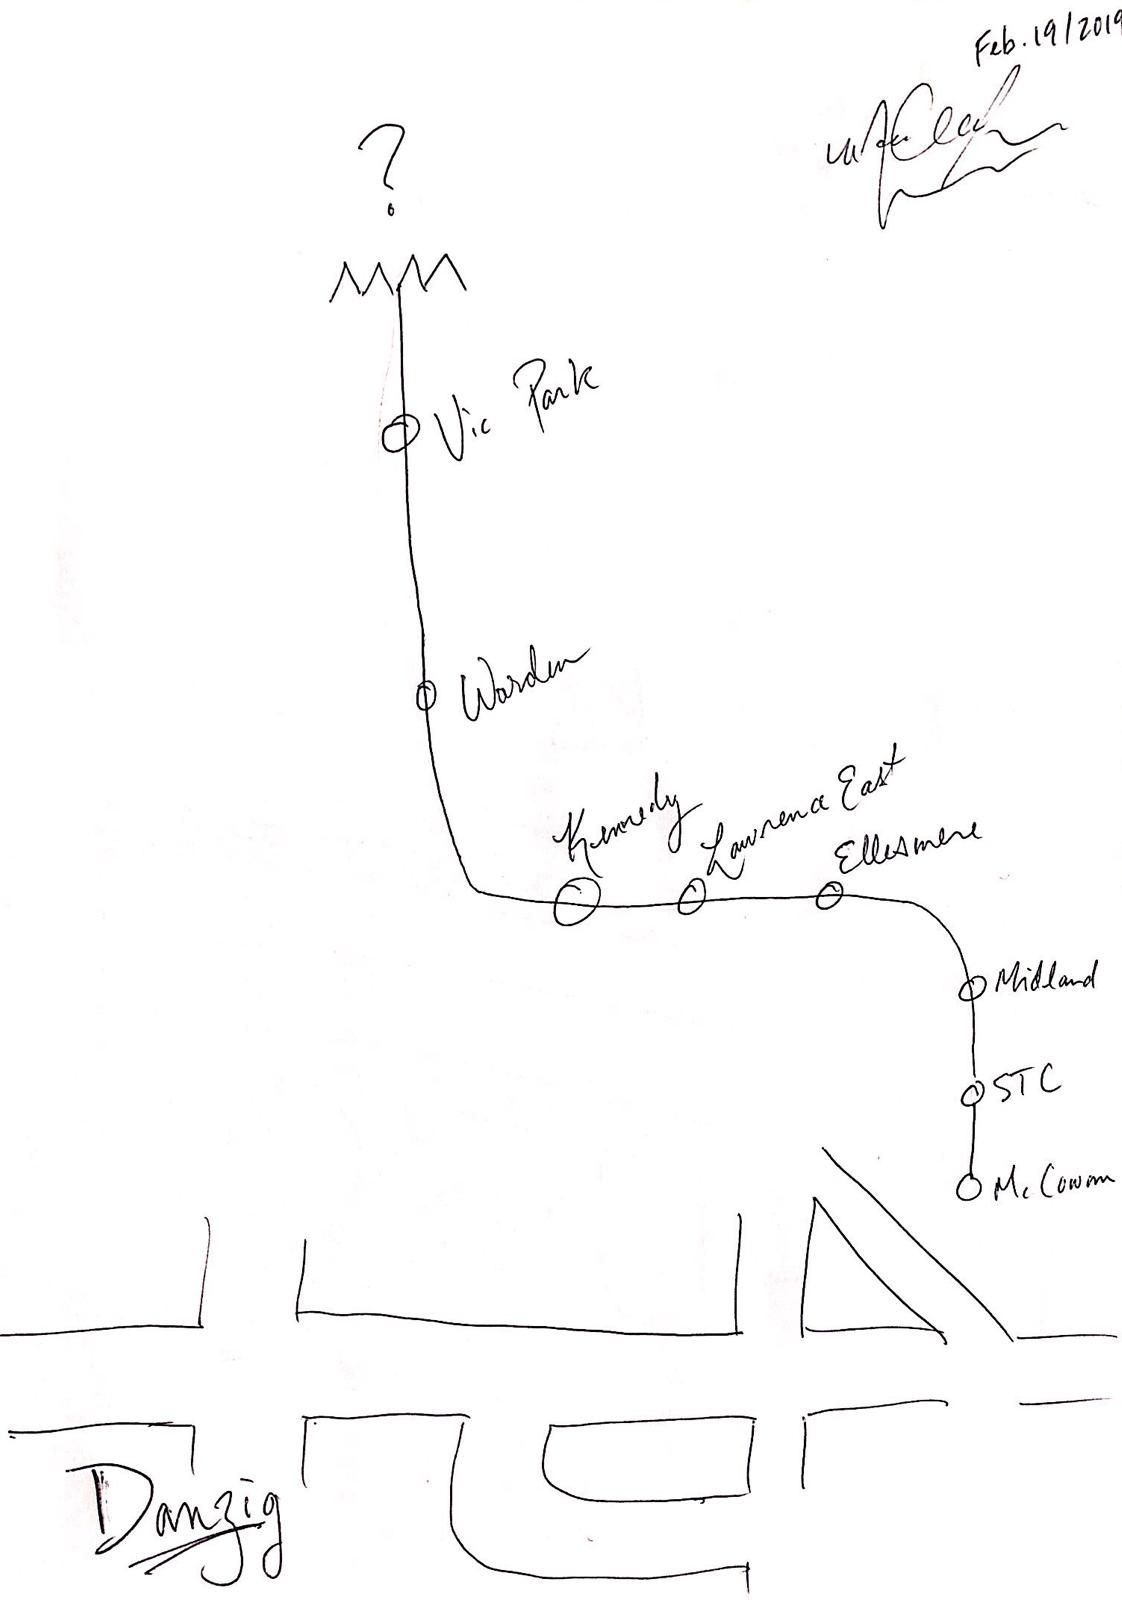 A sketch of what young Adrian De Leon believed Toronto was, based on the TTC stations and places he frequented.